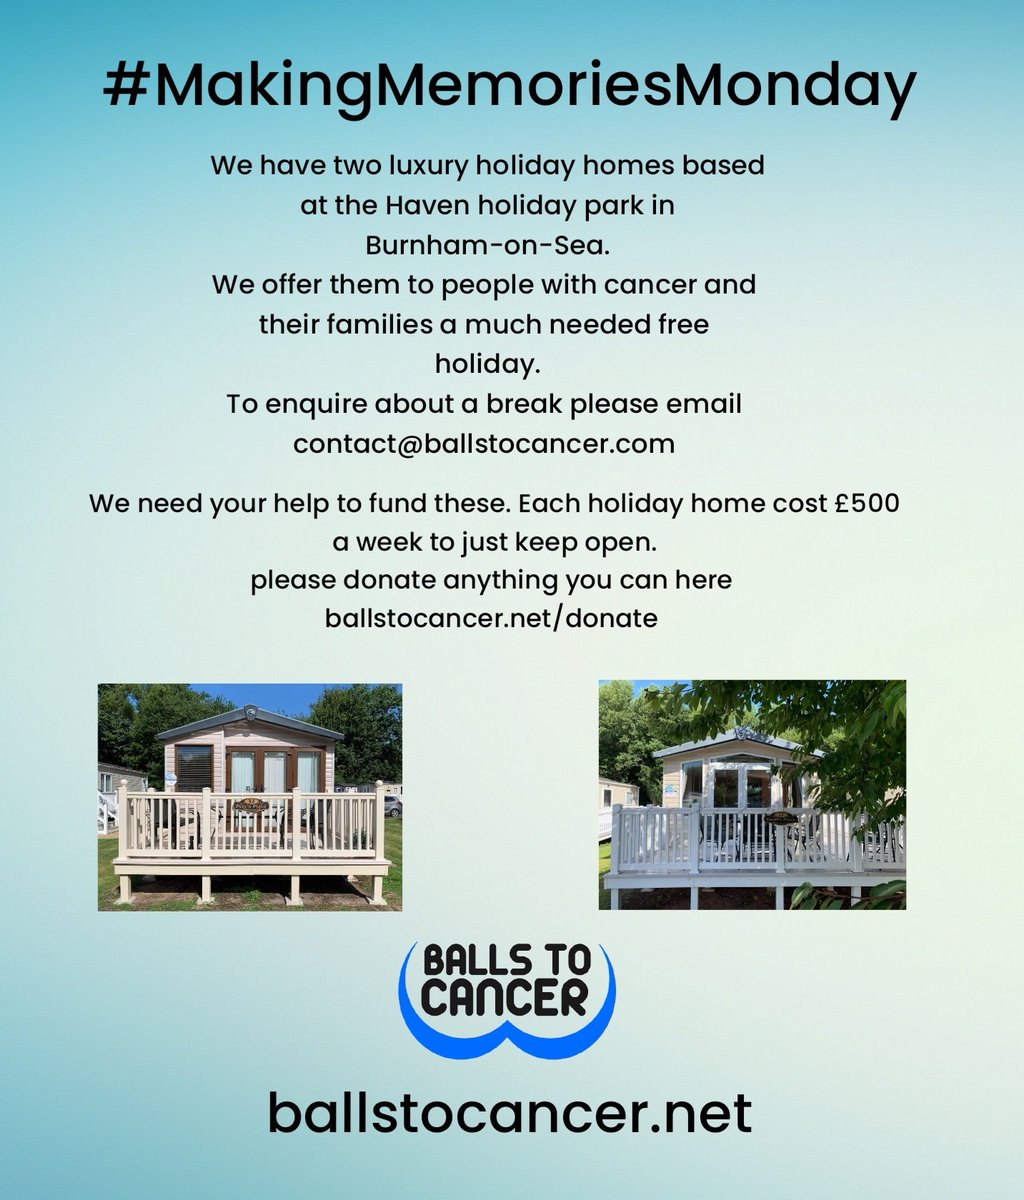 It's #MakingMemories Monday, the day we talk about our two beautiful holiday homes in Burnham-on-Sea that we give free holidays to people with cancer to have a break. We need your help to keep them open. We need your donations NOW justgiving.com/campaign/free-…